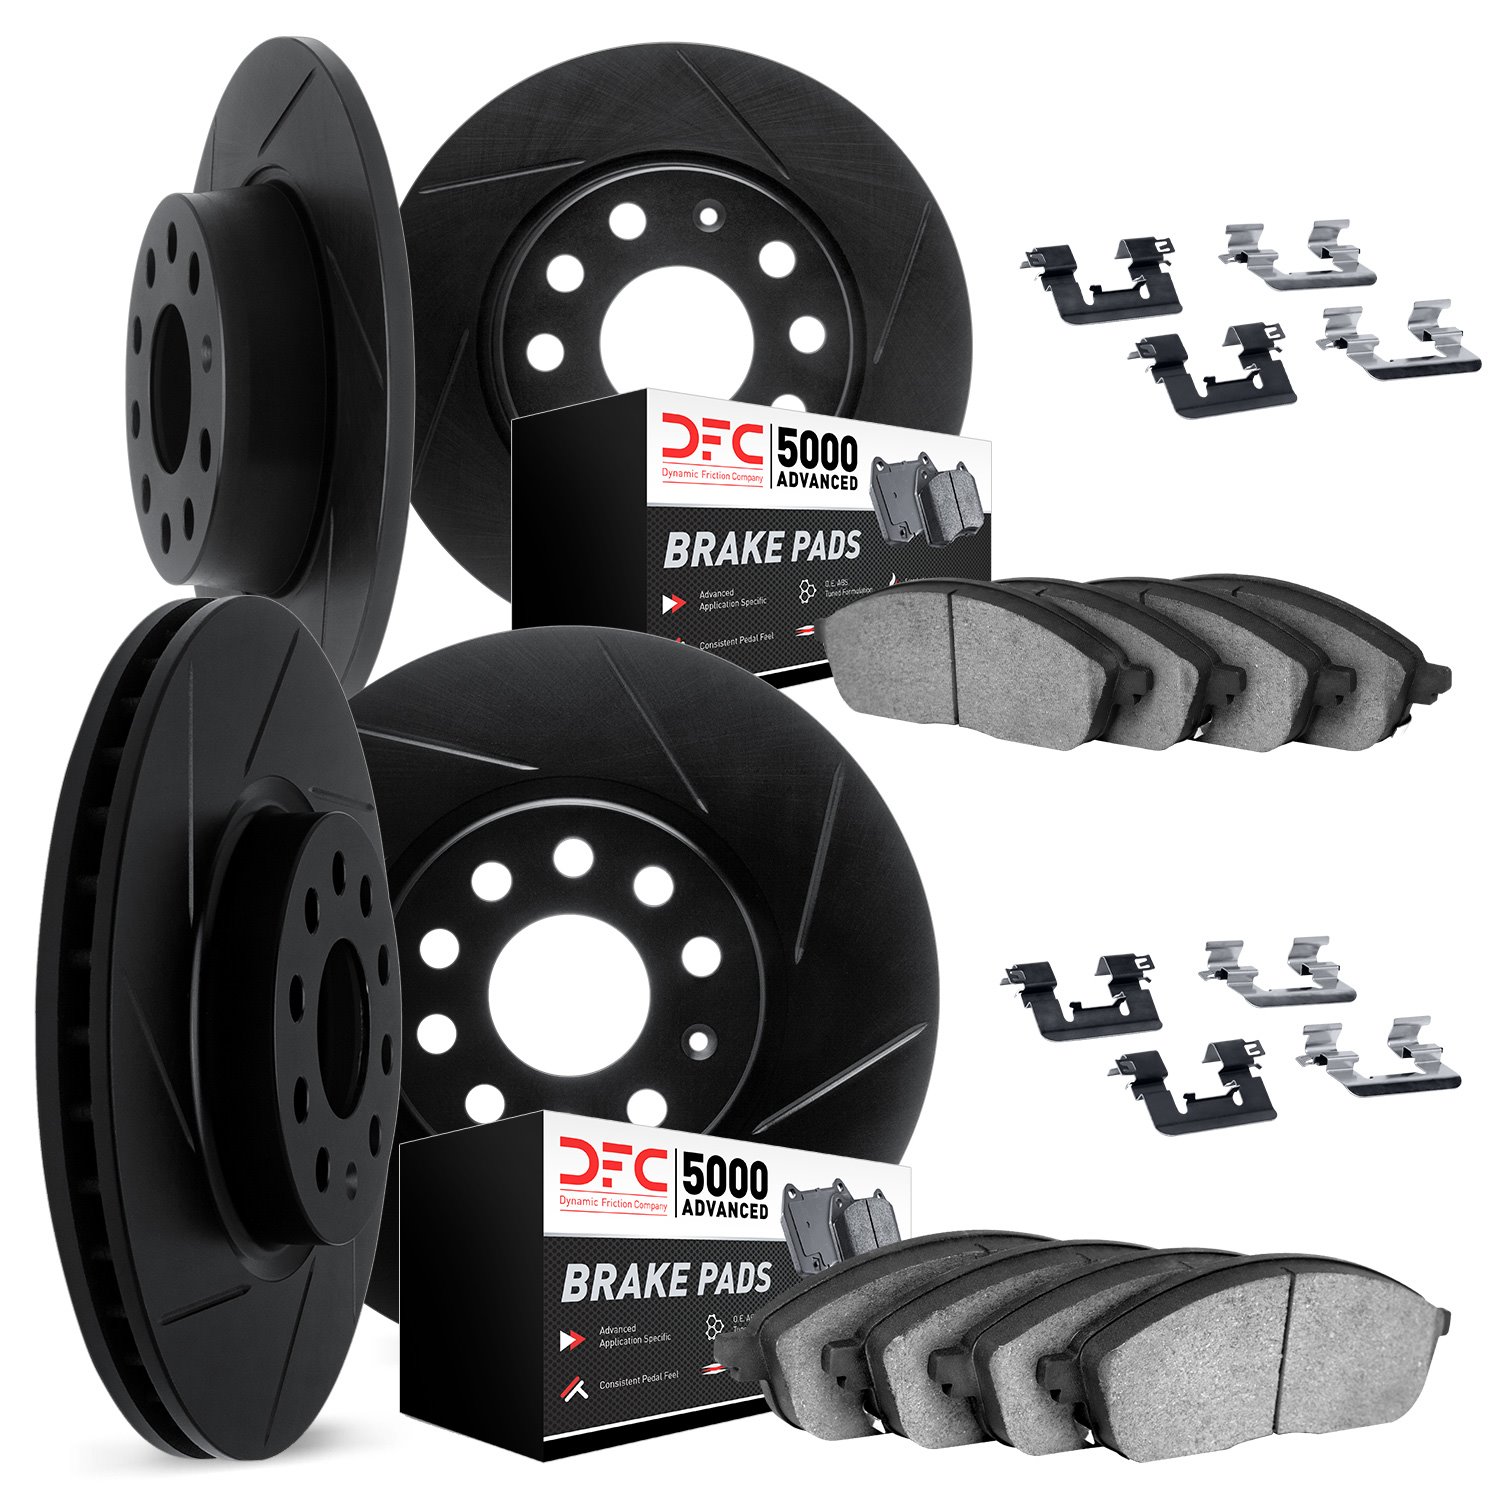 3514-59082 Slotted Brake Rotors w/5000 Advanced Brake Pads Kit & Hardware [Black], 2007-2015 Acura/Honda, Position: Front and Re